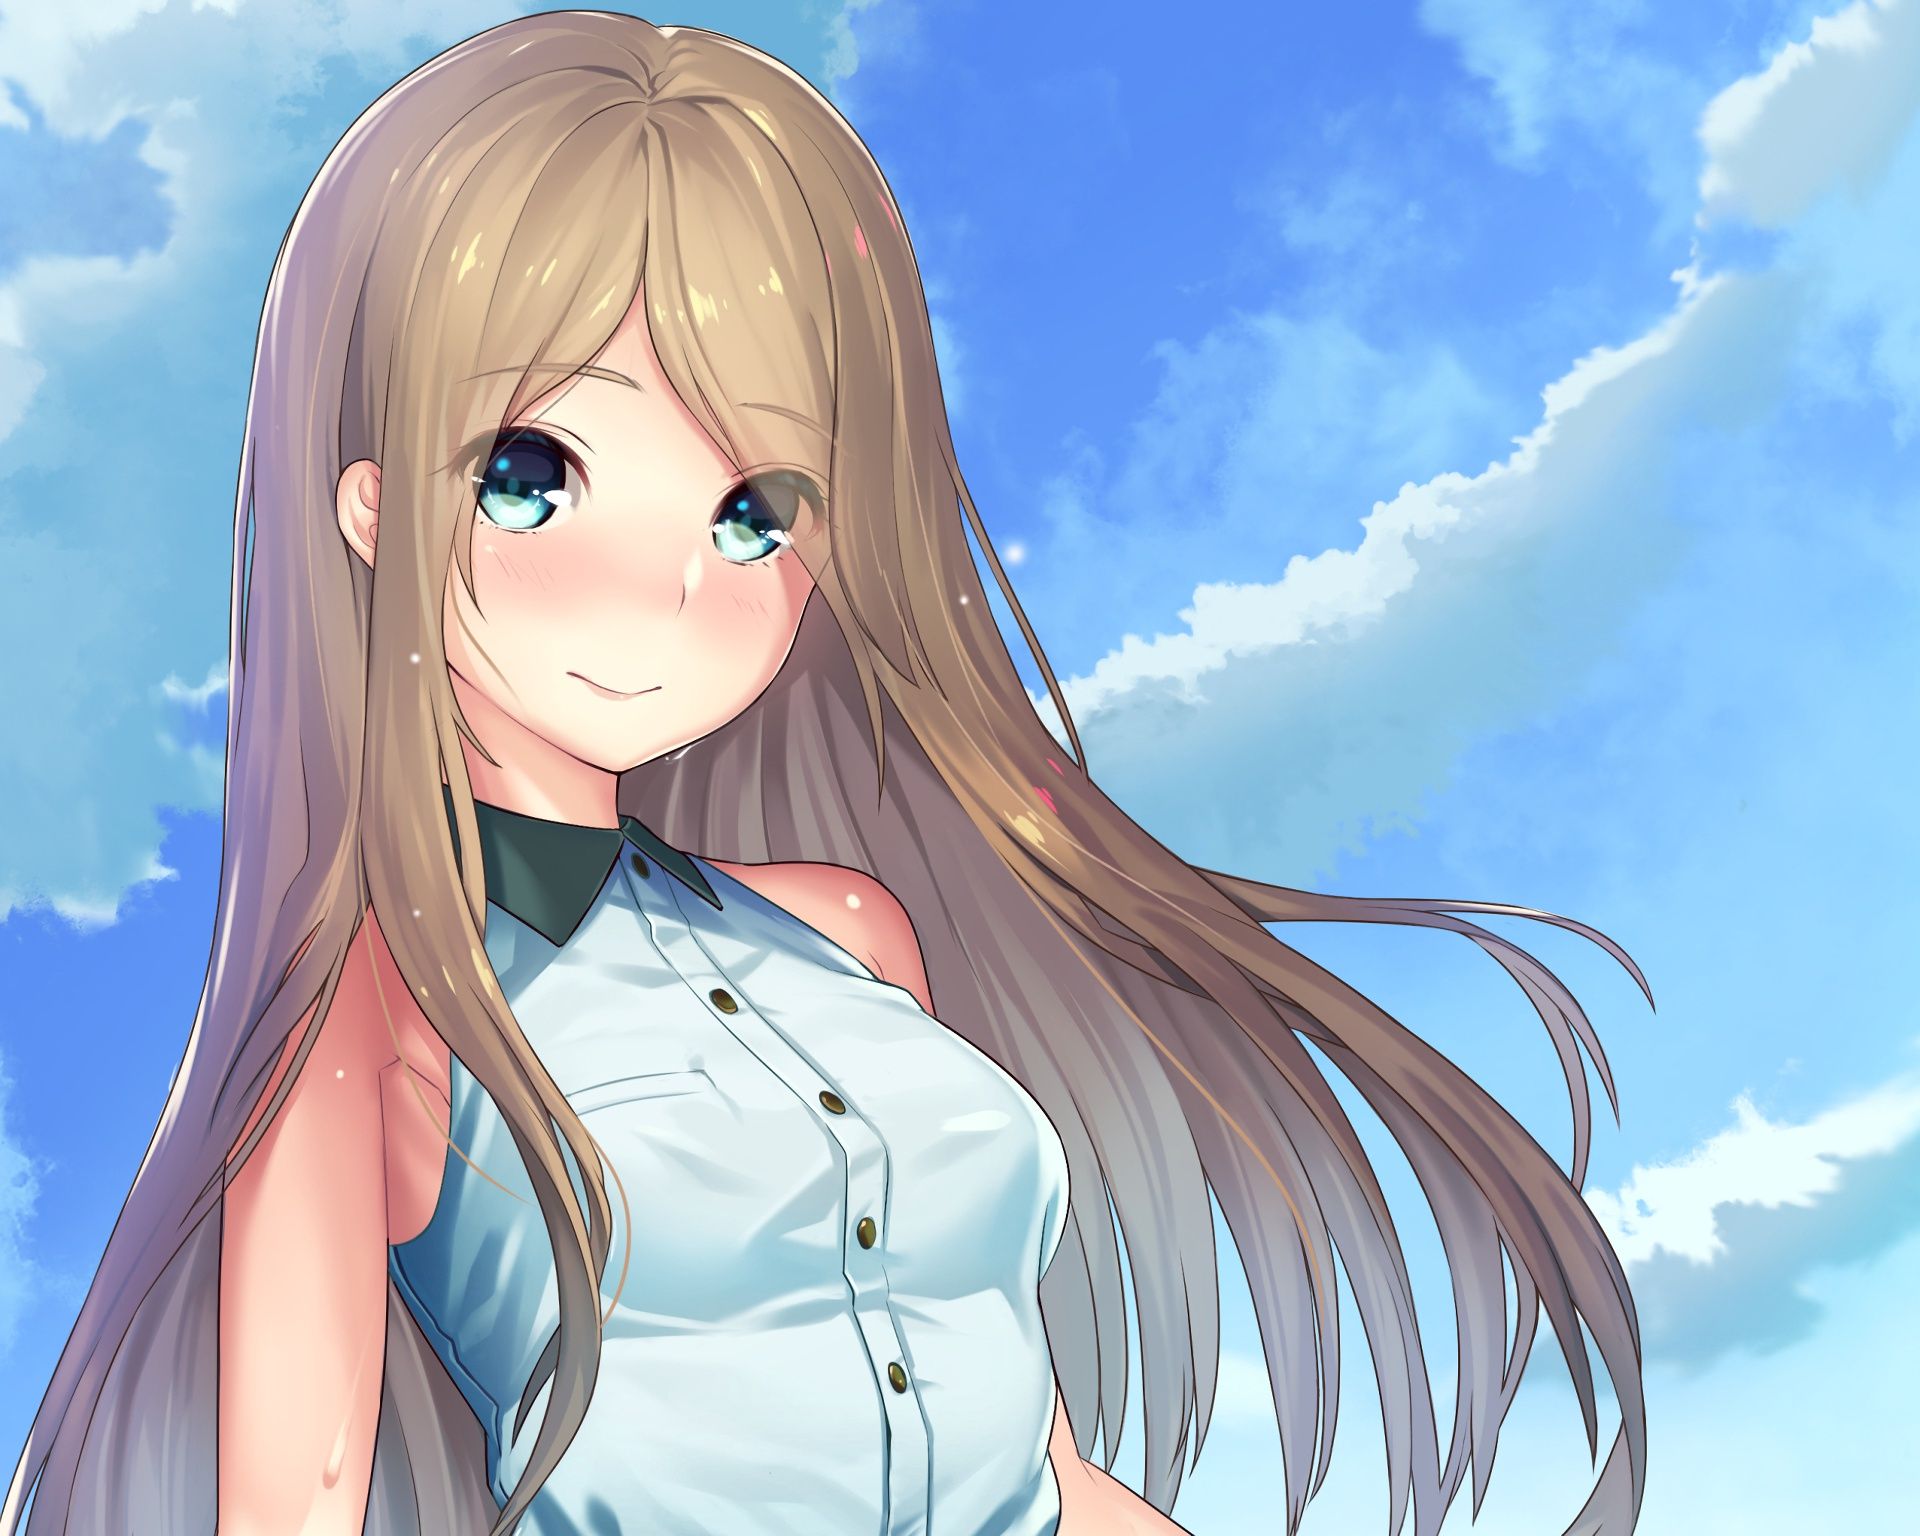 3D Anime Girl with Blonde Hair - wide 4